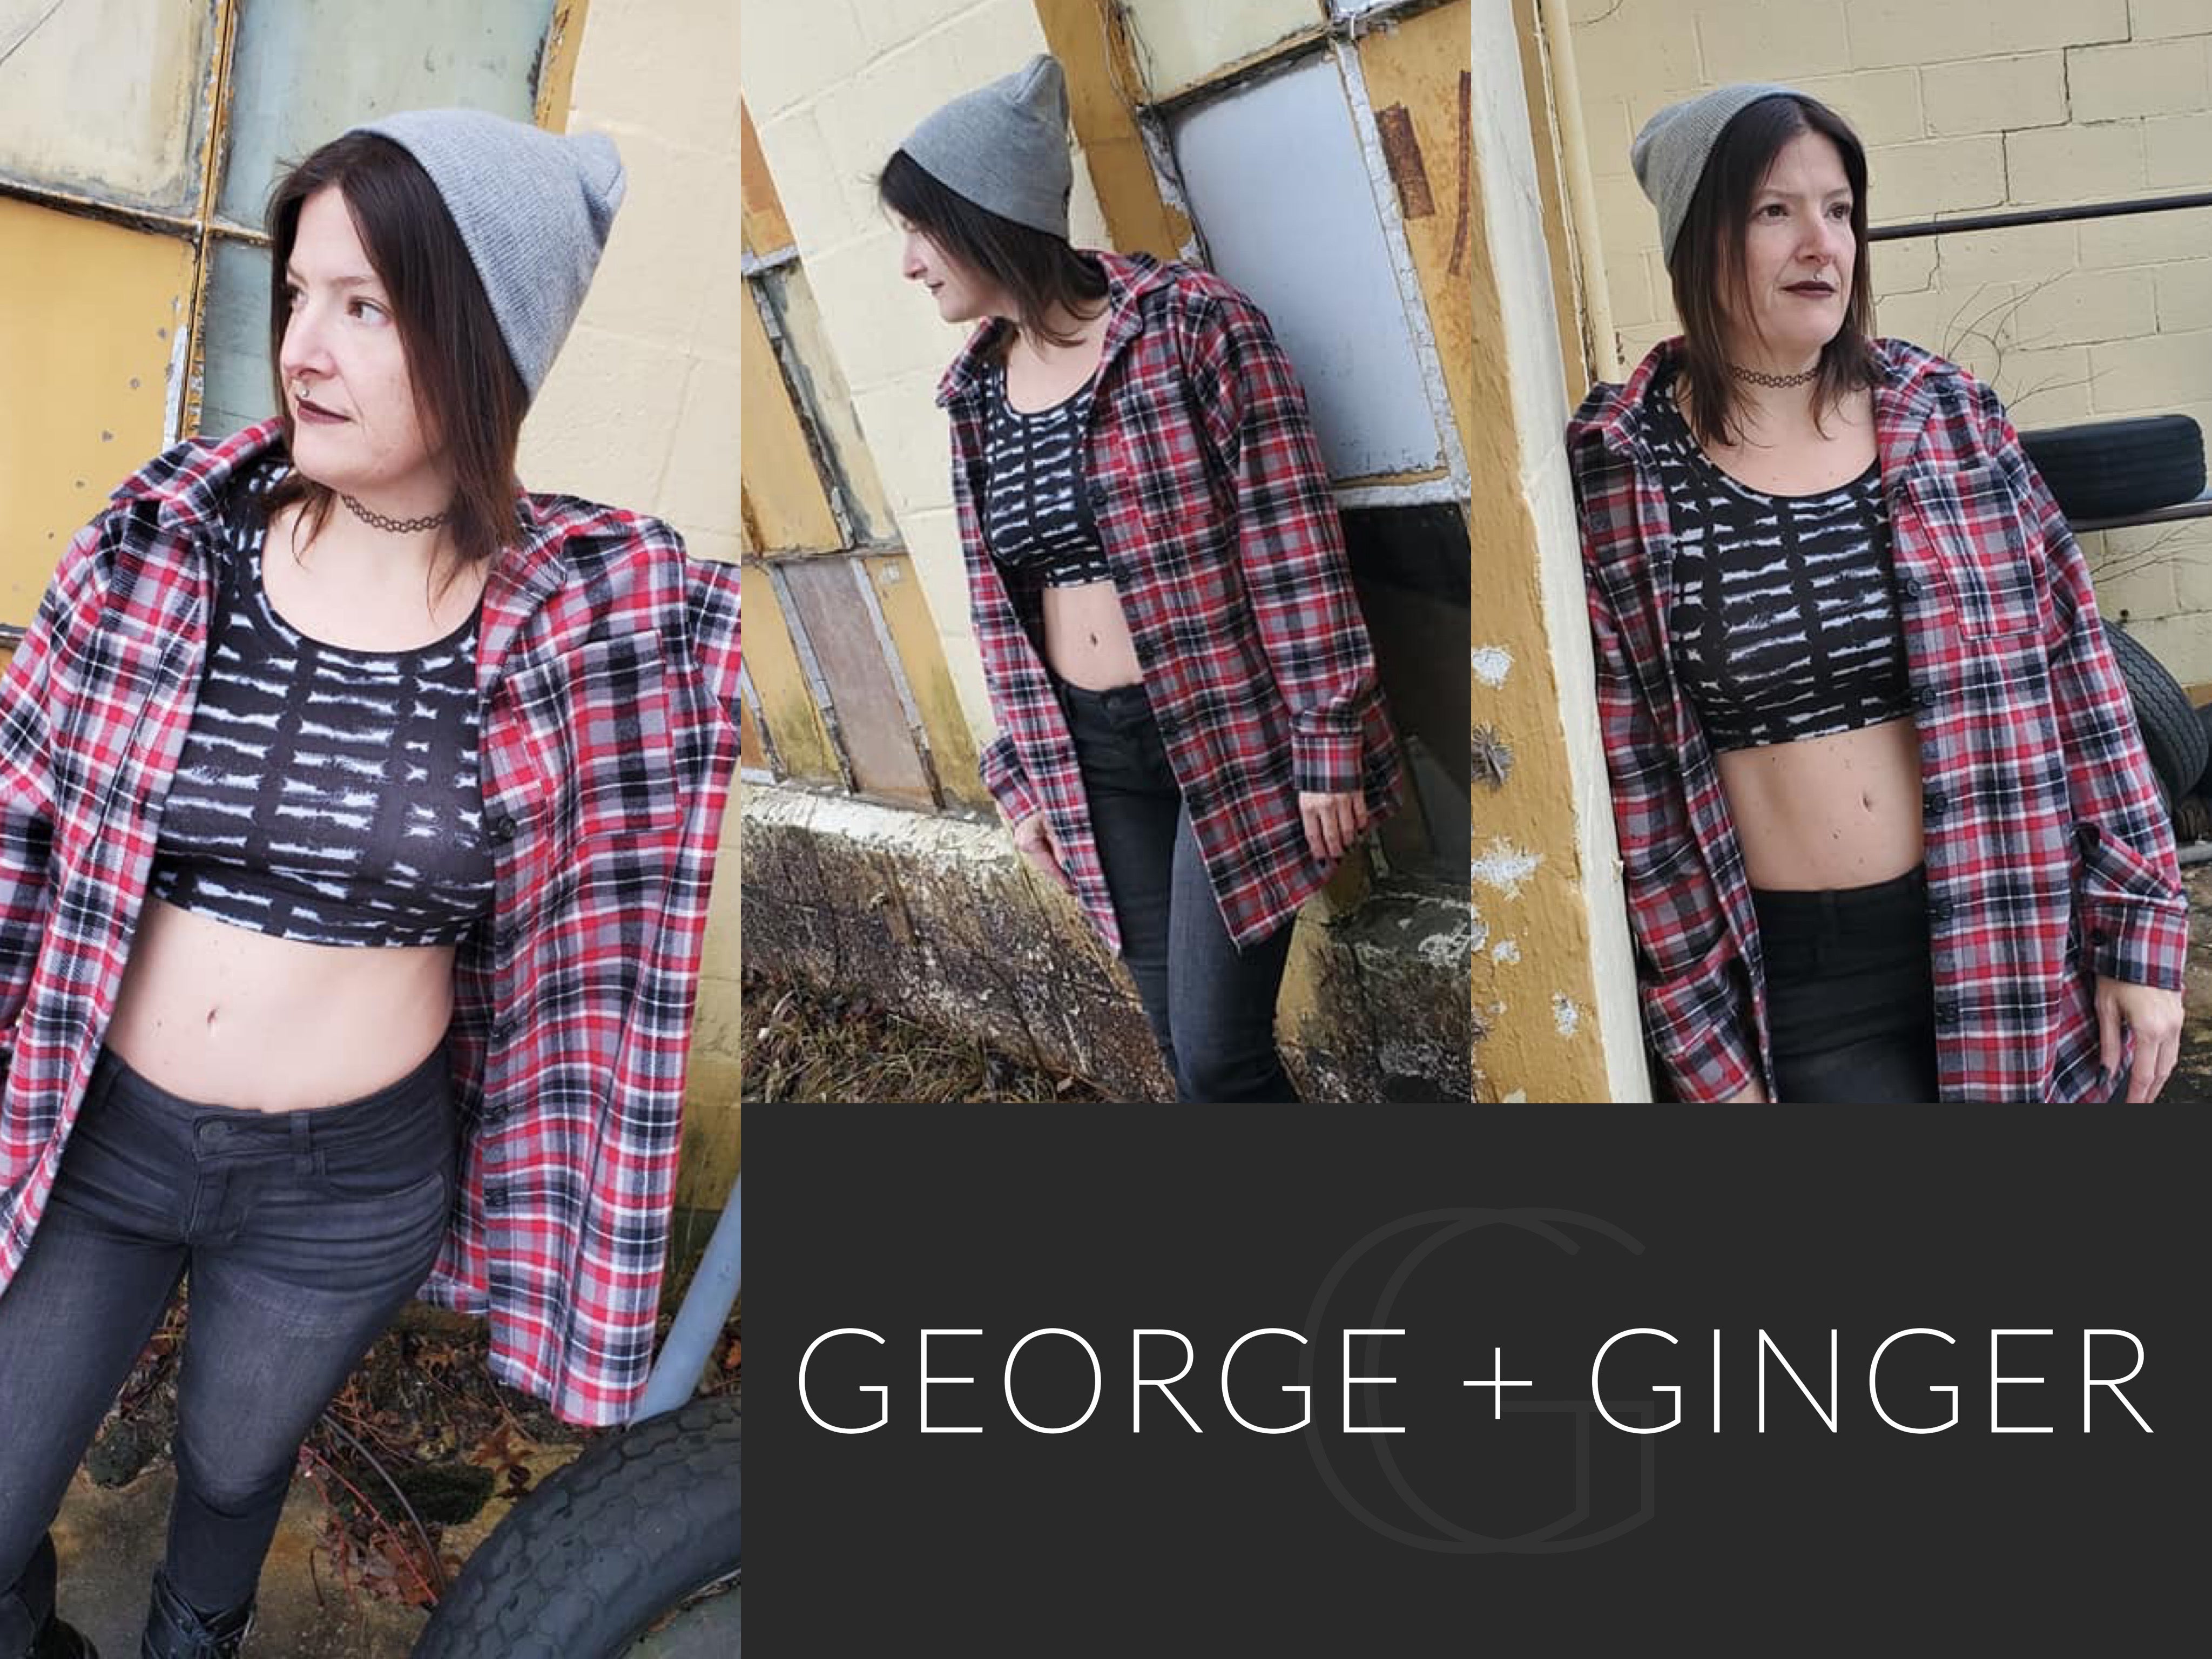 The Rave Shirt Set PDF Sewing Pattern – George And Ginger Patterns